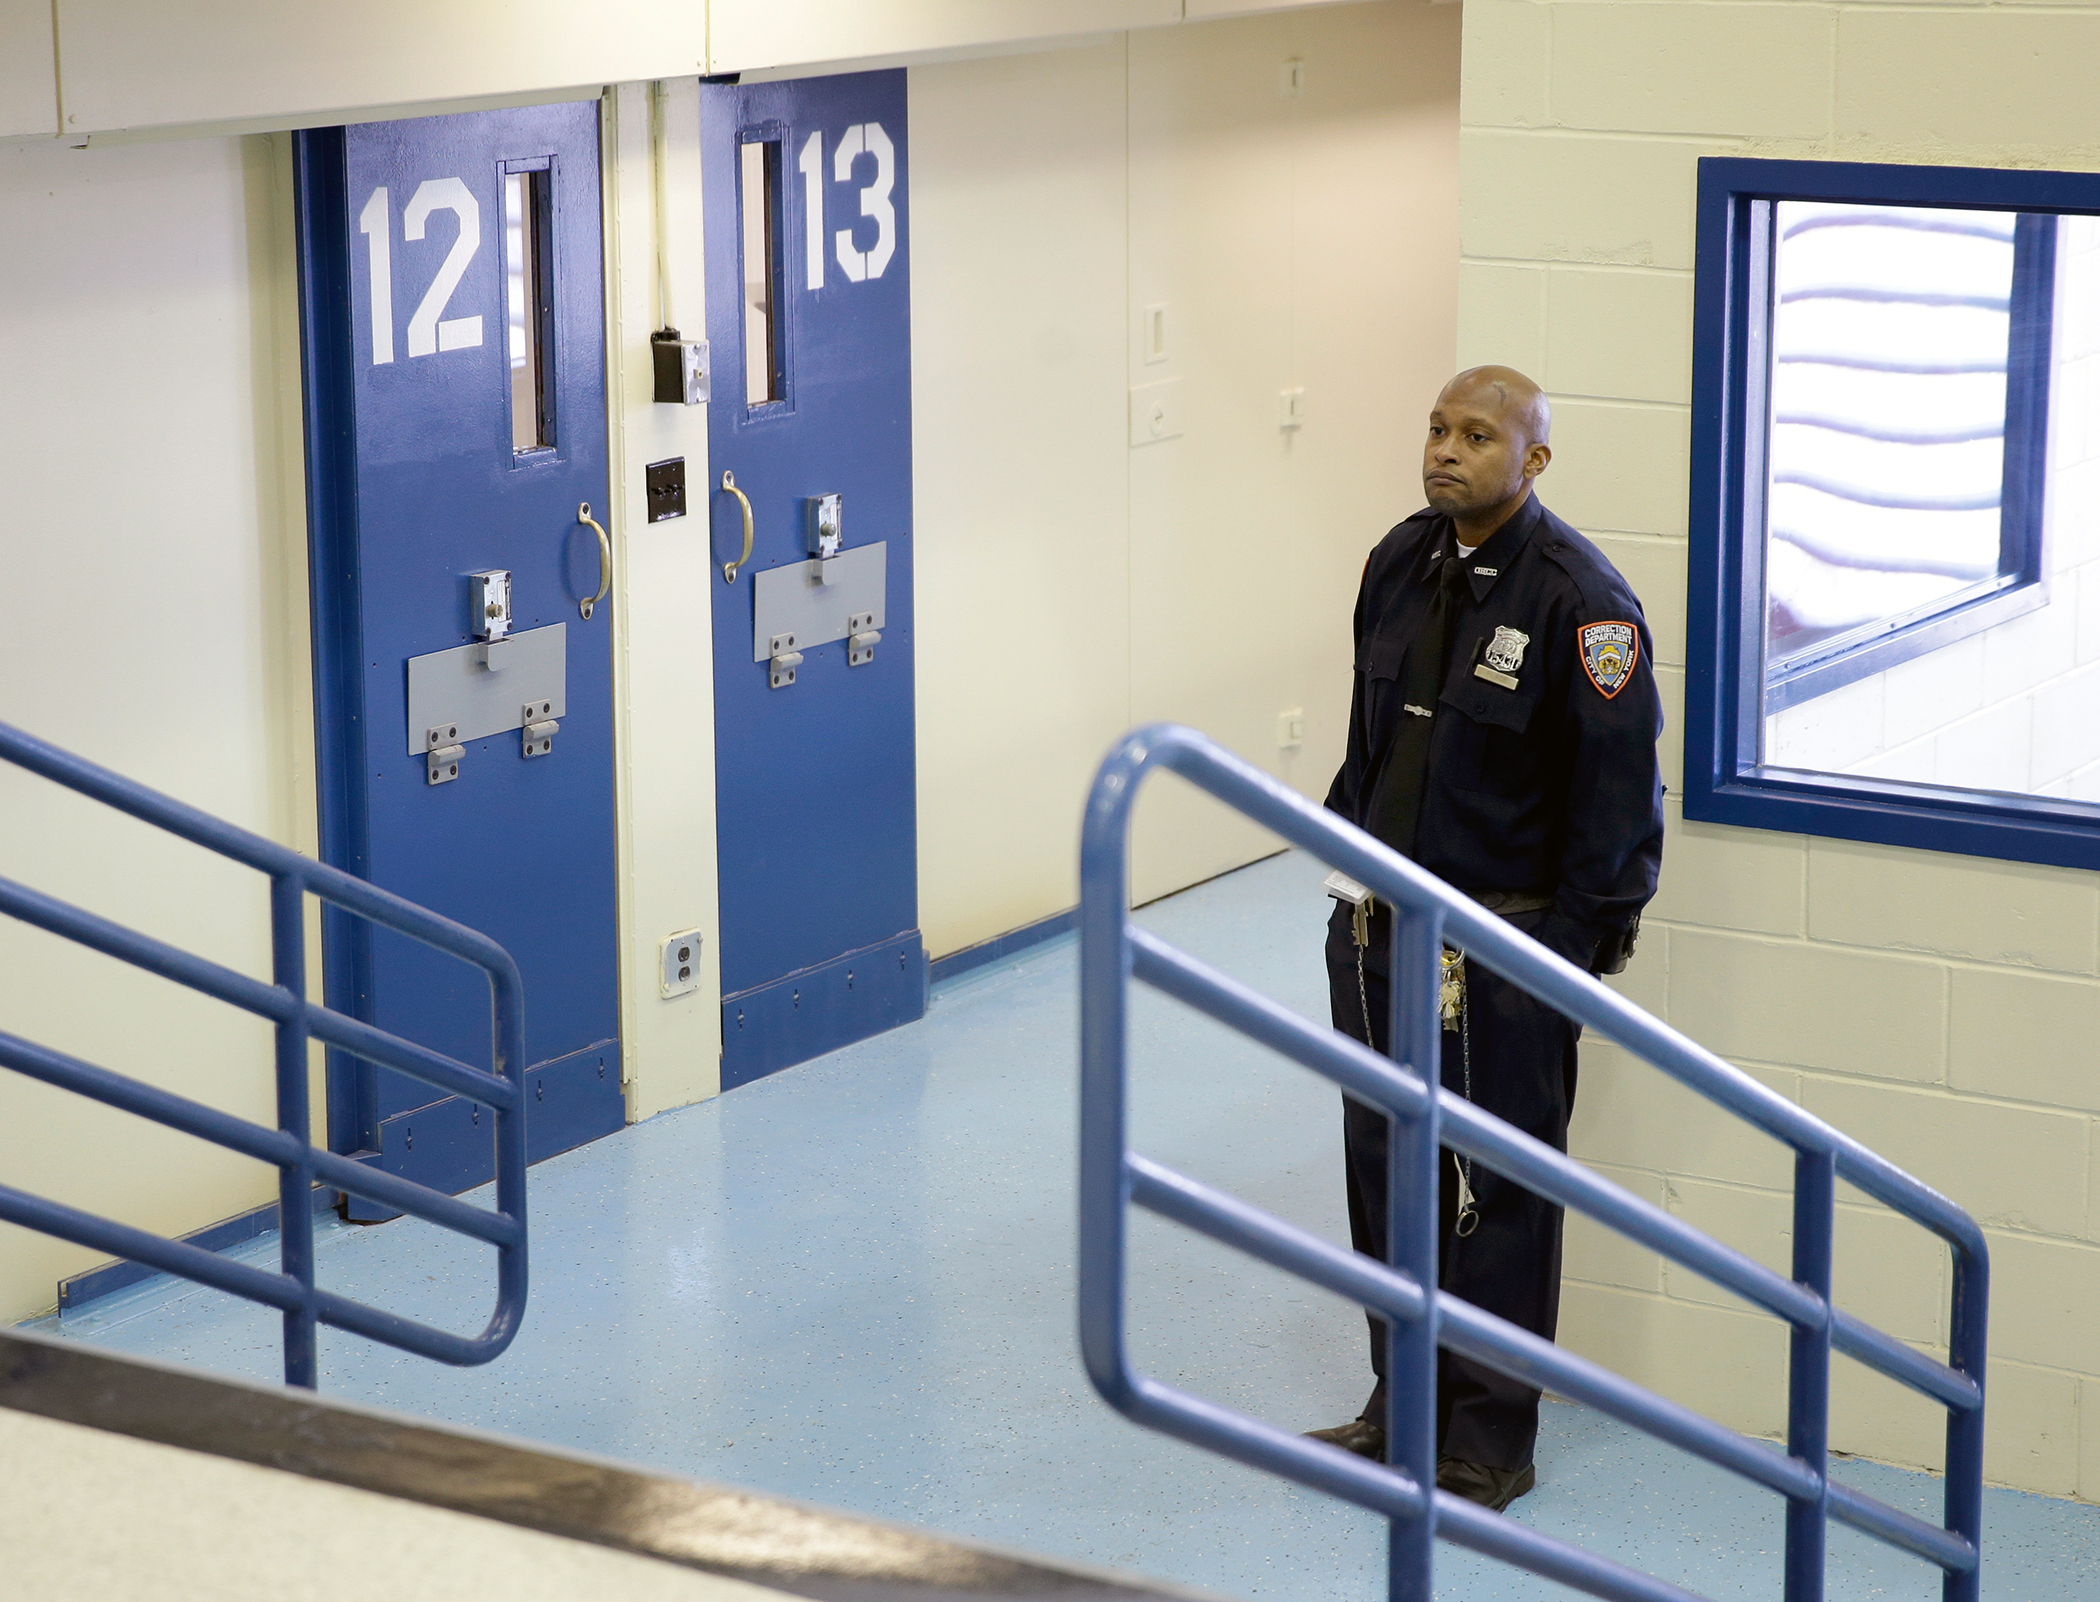 A corrections officers in an enhanced supervision housing unit on Rikers Island in New York, Thursday, March 12, 2015.